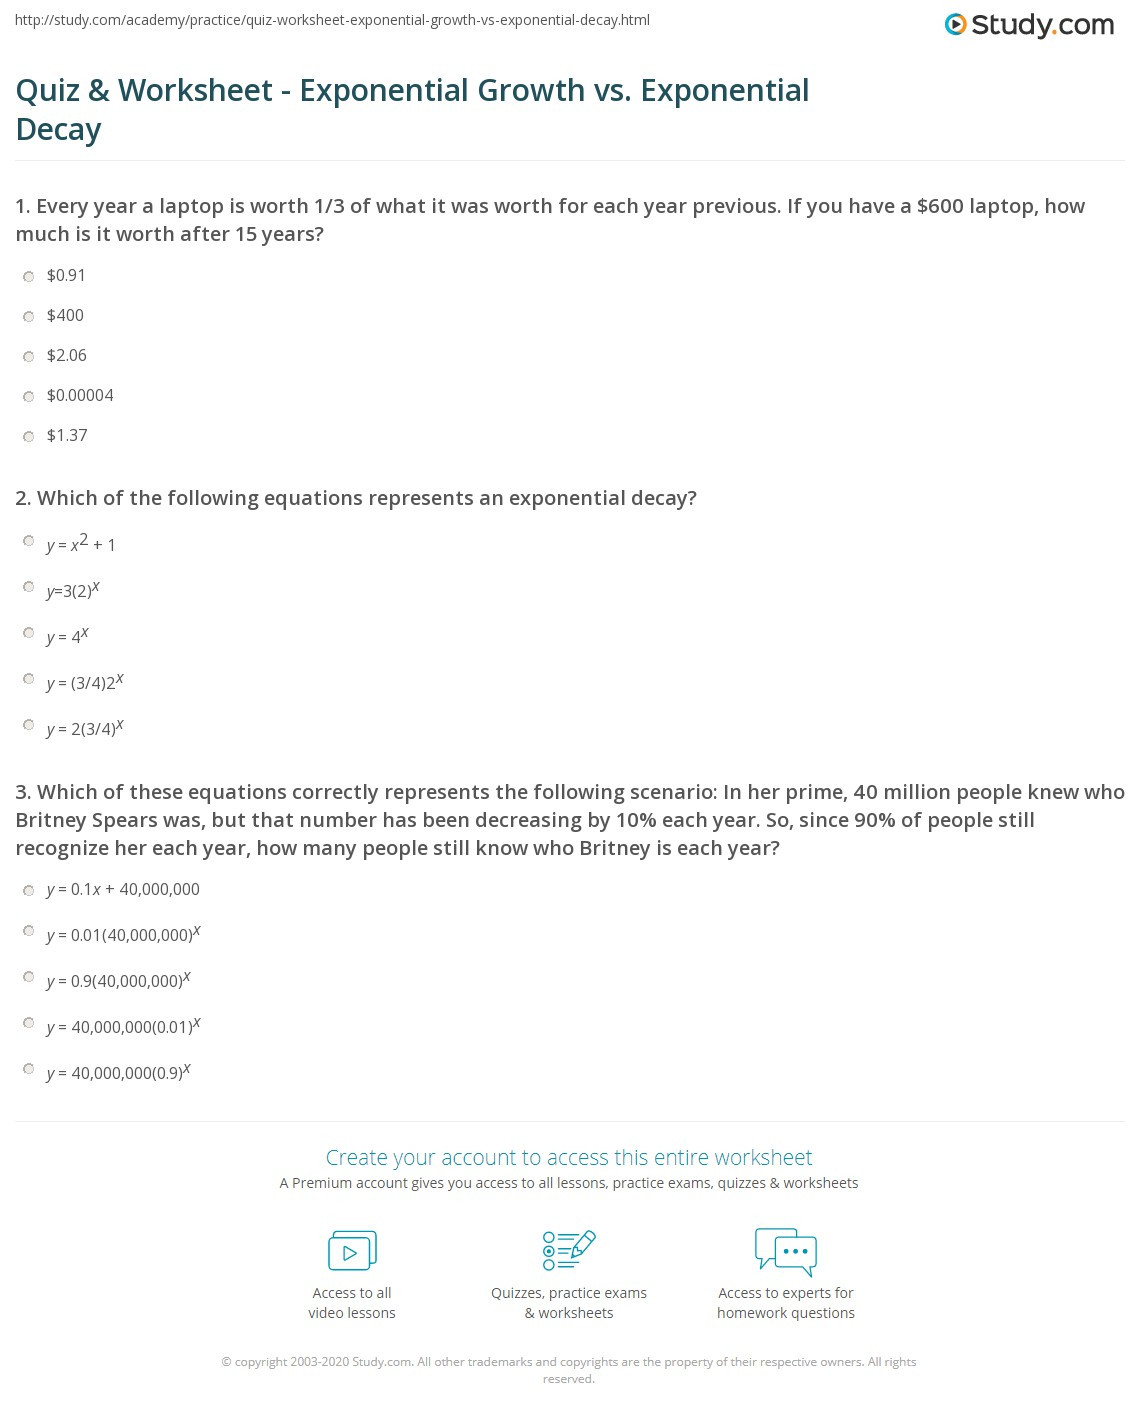 Growth and Decay Worksheet Quiz &amp; Worksheet Exponential Growth Vs Exponential Decay